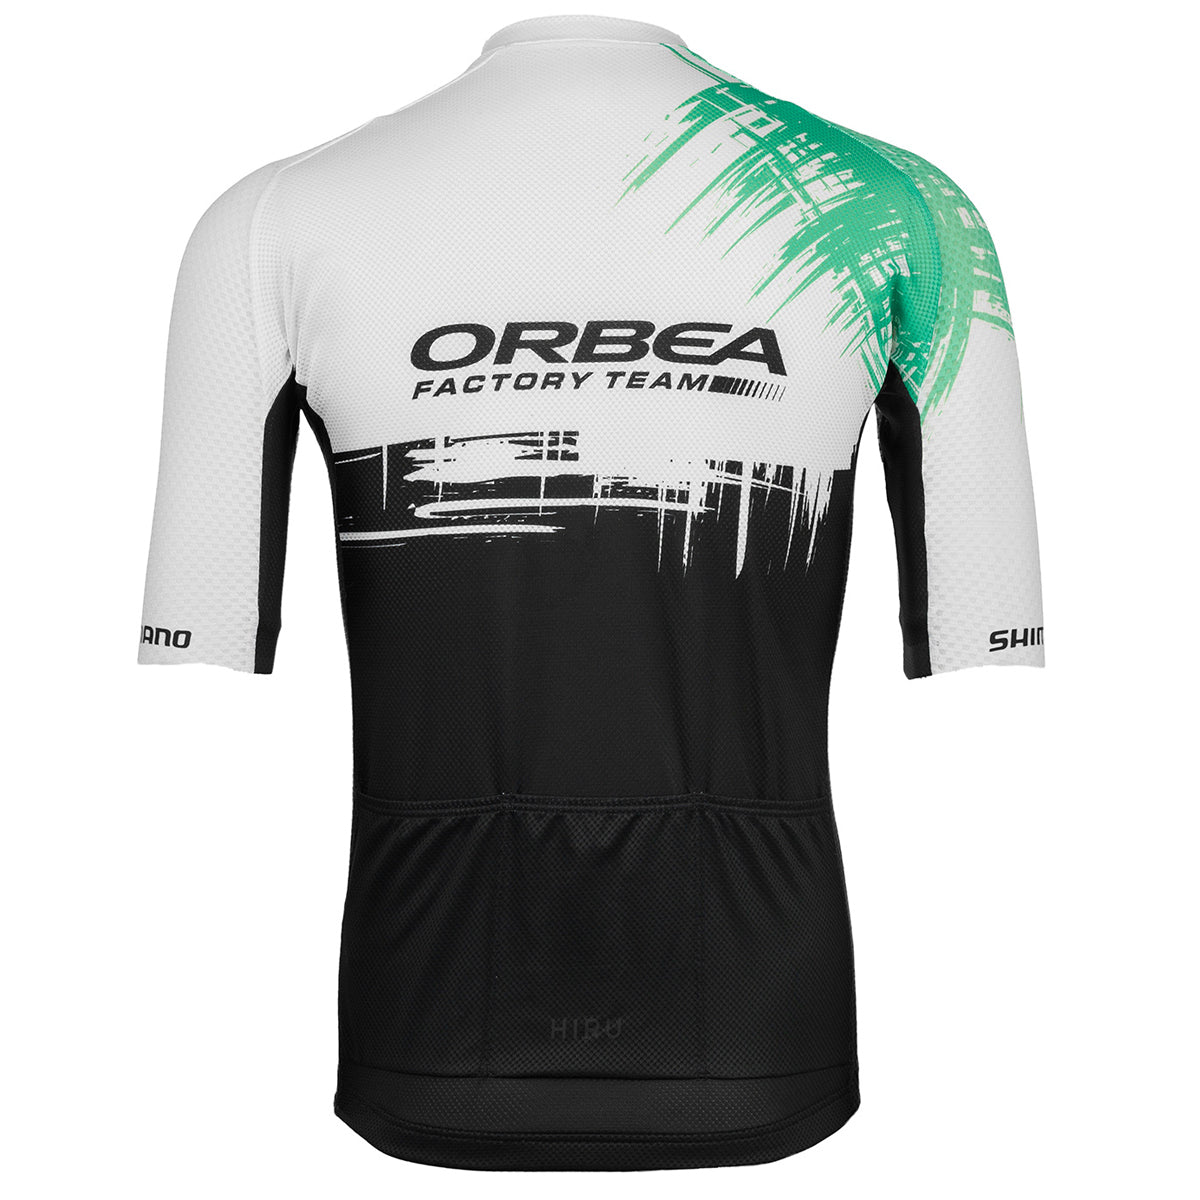 Culpable Calle esfera Maillot Orbea Factory Team 2021 Light | All4cycling